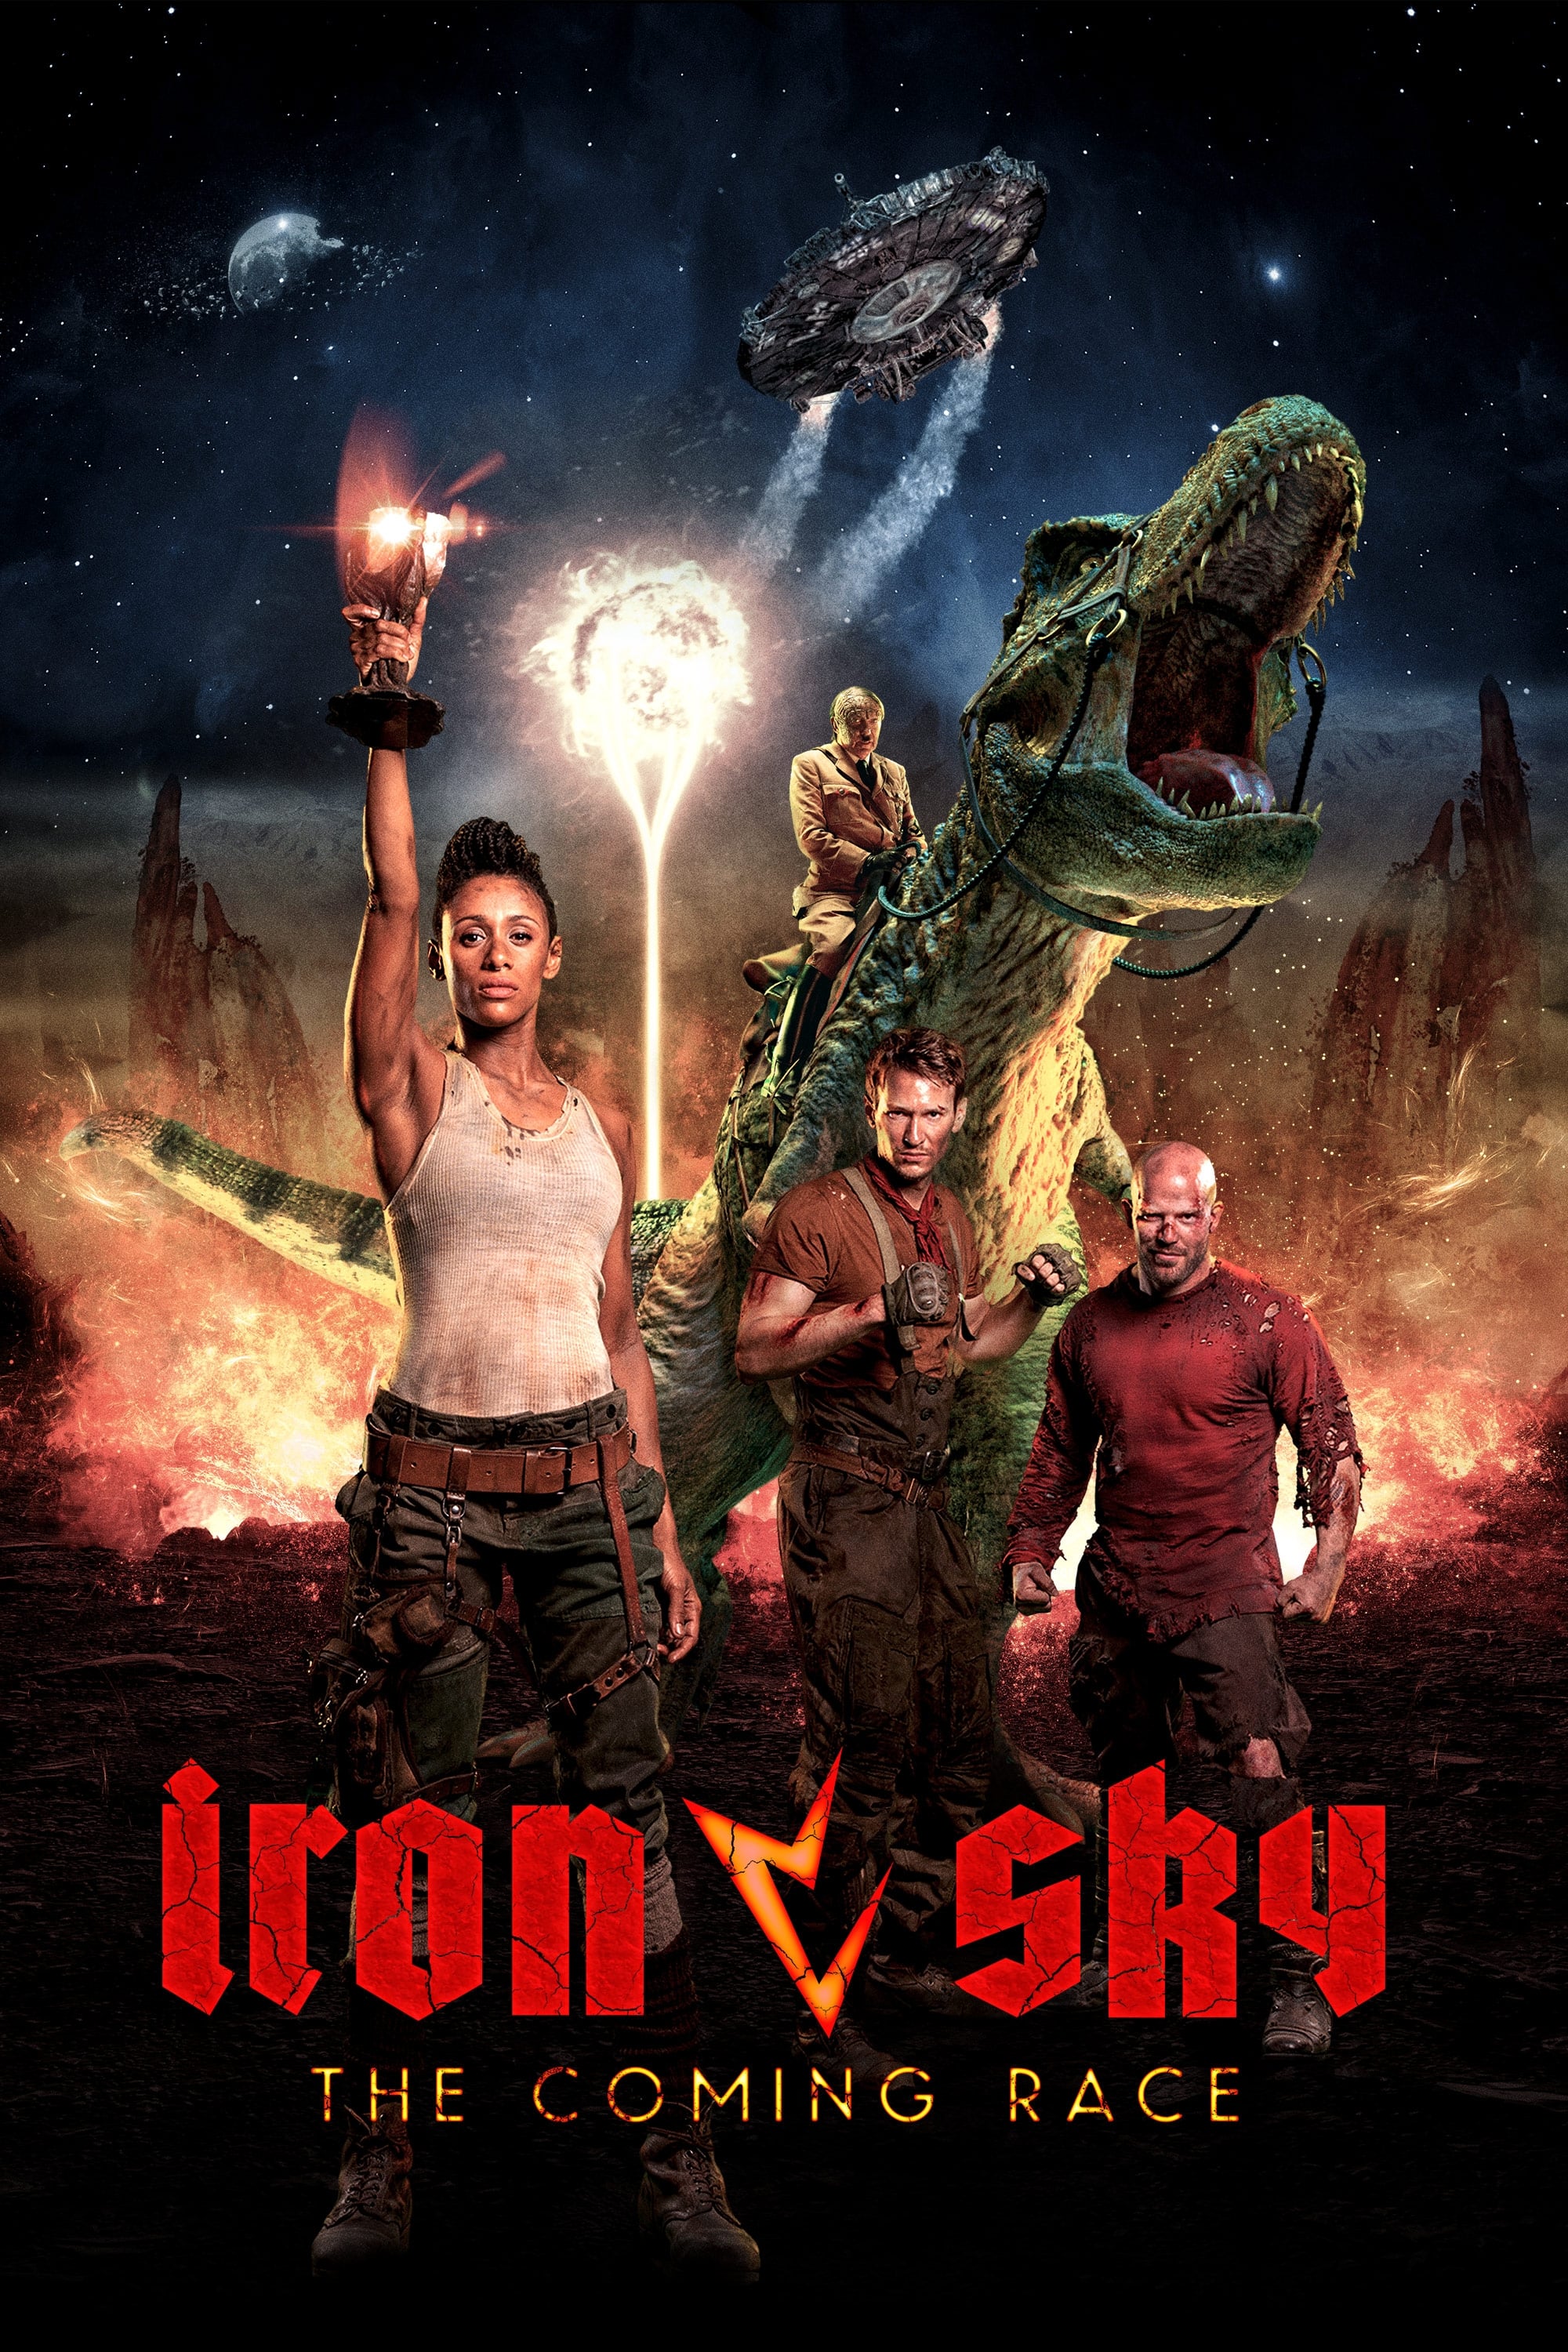 ver-iron-sky-the-coming-race-online-hd-cuevana-8